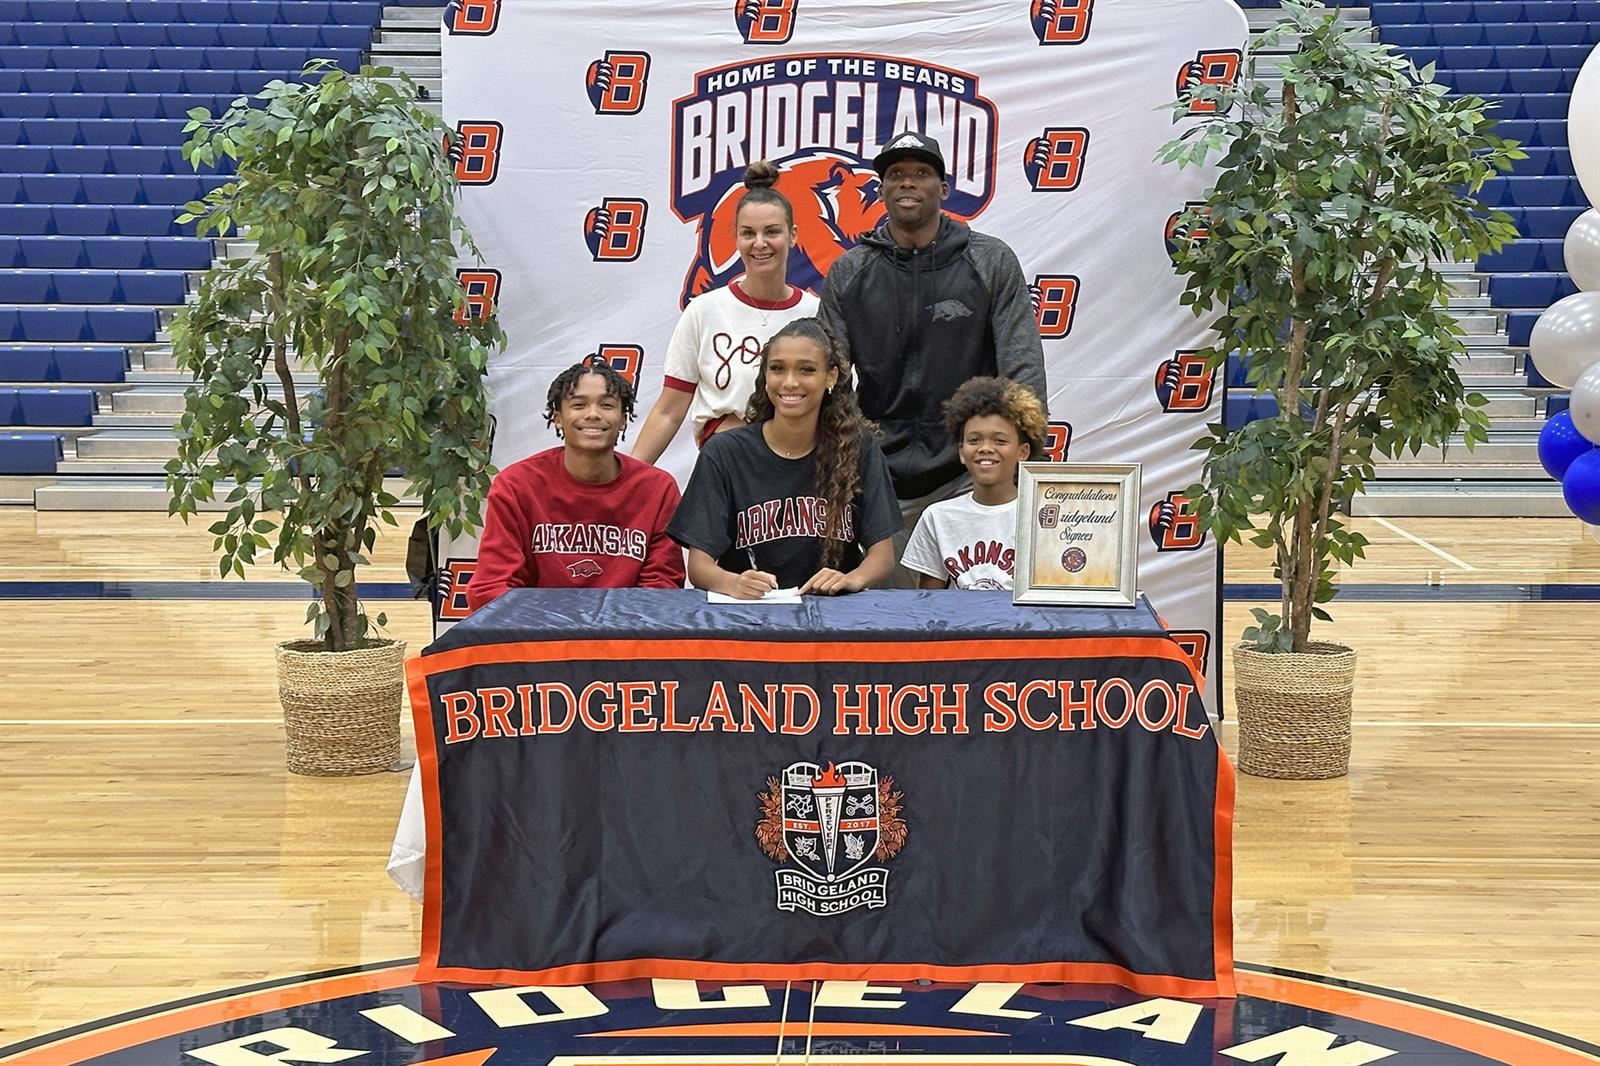 Bridgeland senior Anaiyah Robinson, seated center, signed a letter of intent to play soccer at the University of Arkansas.